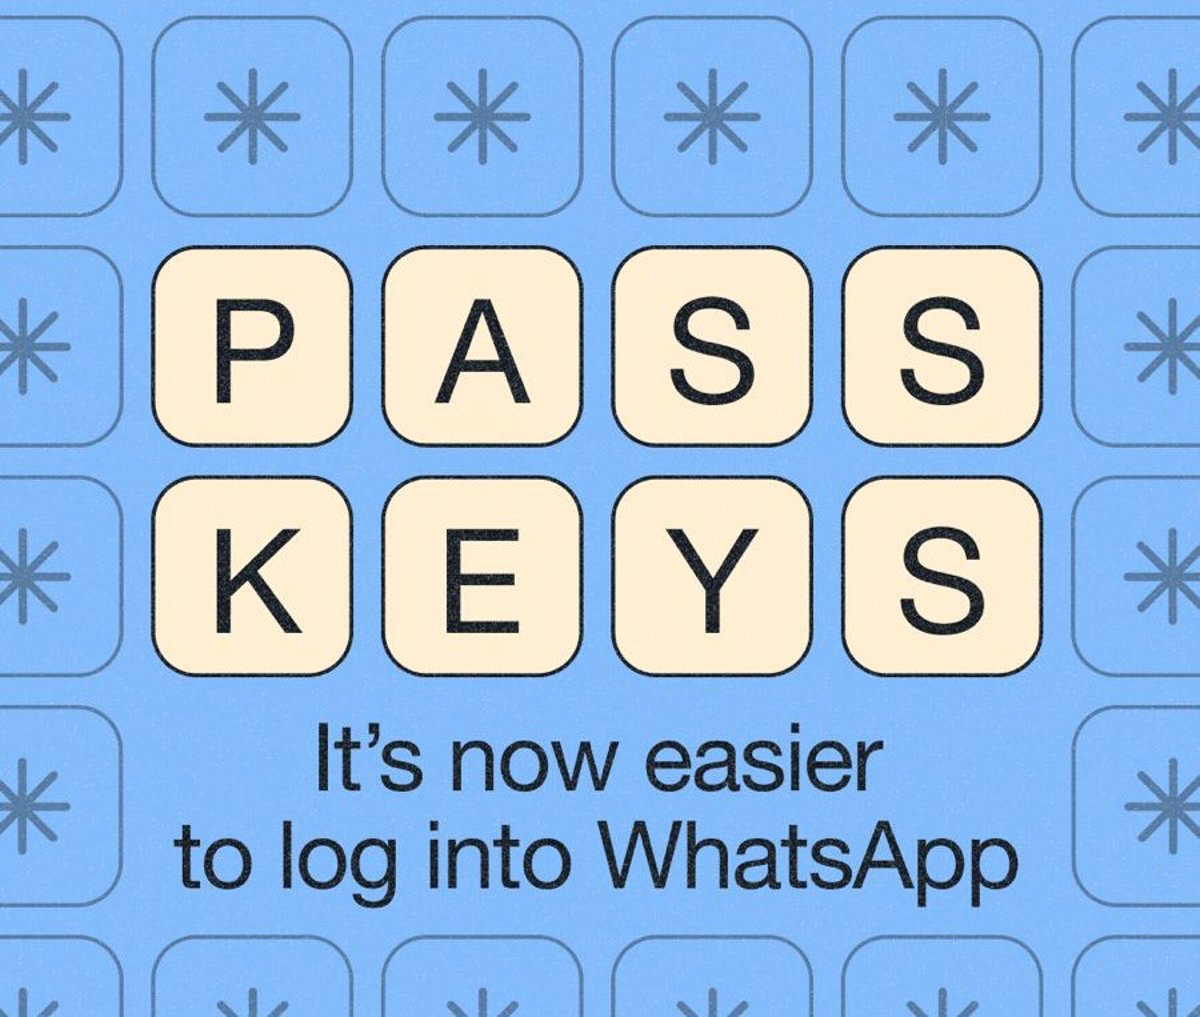 WhatsApp extends login with 'passkeys' to iOS devices